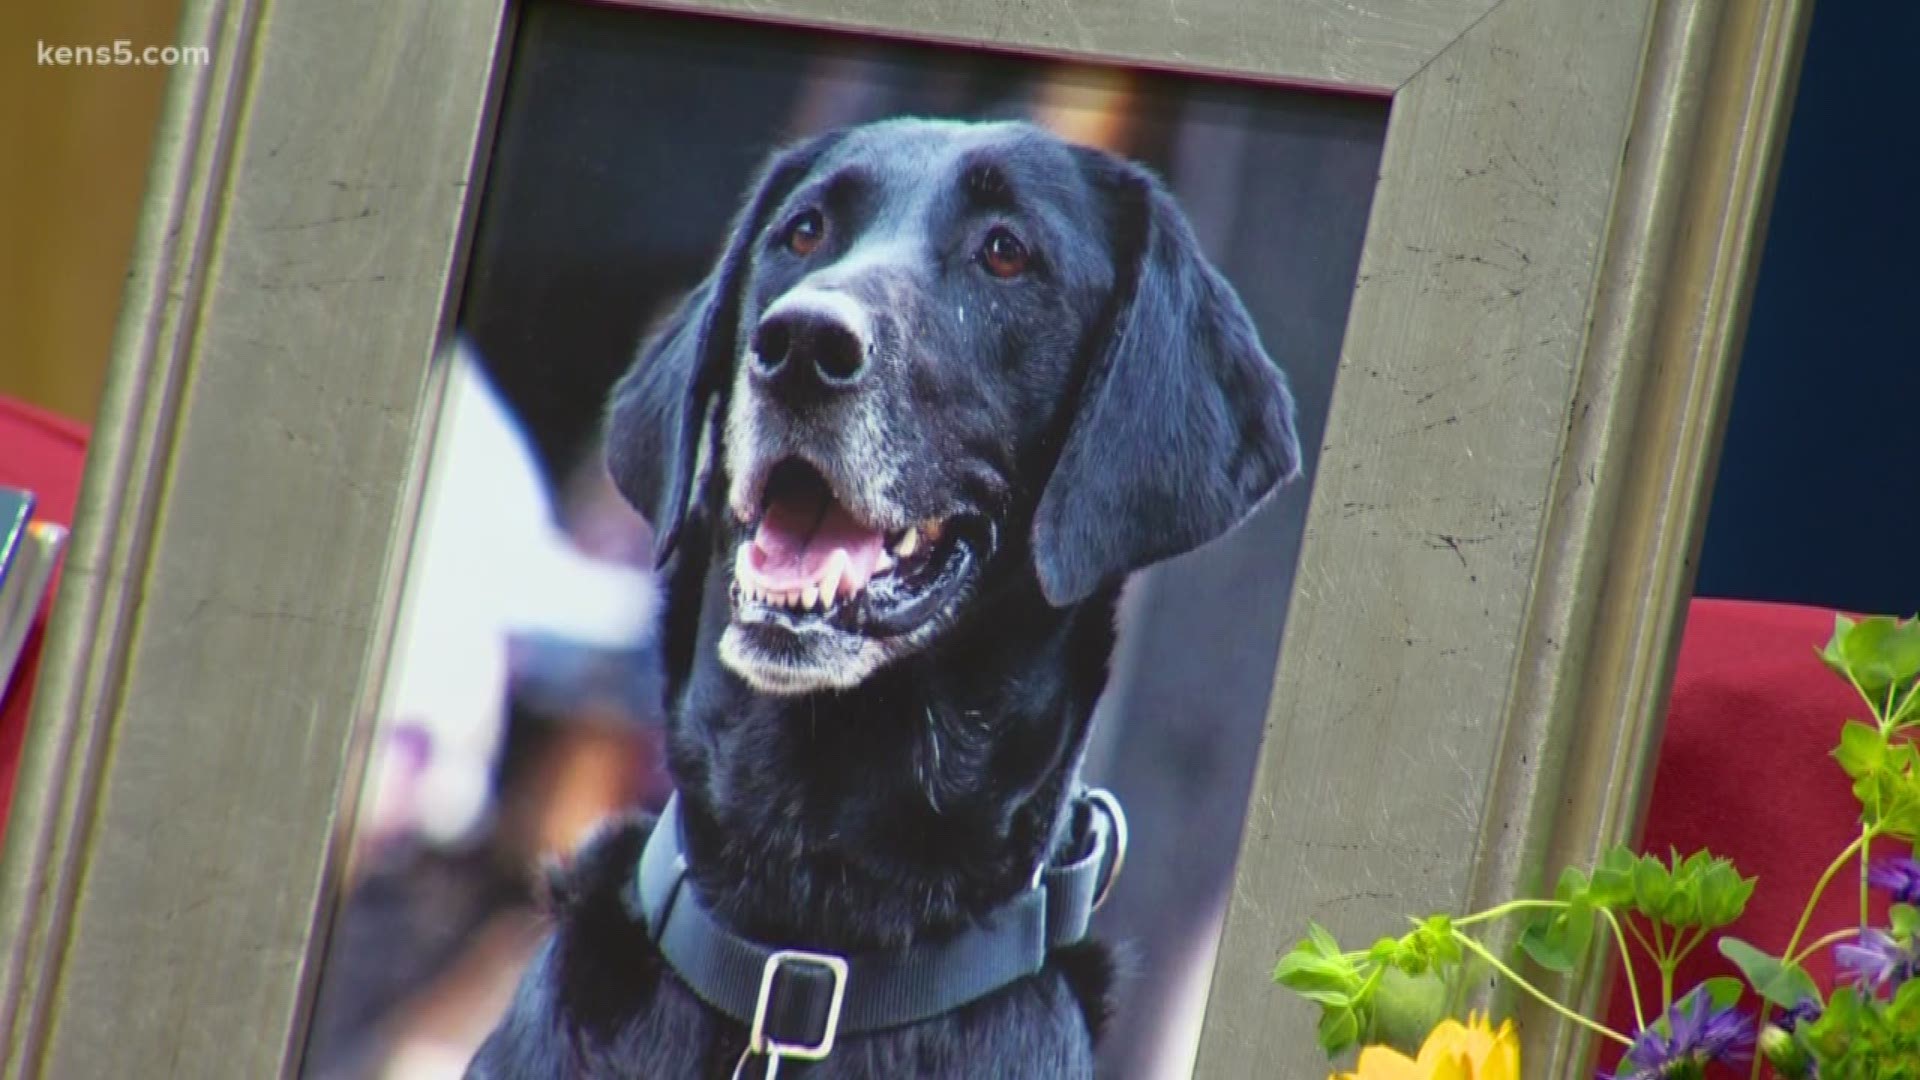 She died earlier this month after serving SAFD for nine years. Firefighters trained Kai in accelerant detection after rescuing her from a shelter. During her time on the force K-9 kai was awarded the American Humane Arson Dog of the Year in 2014 and was featured in two National Geographic books. But her handler, Justin Davis, says she was more than an award-wining K-9.